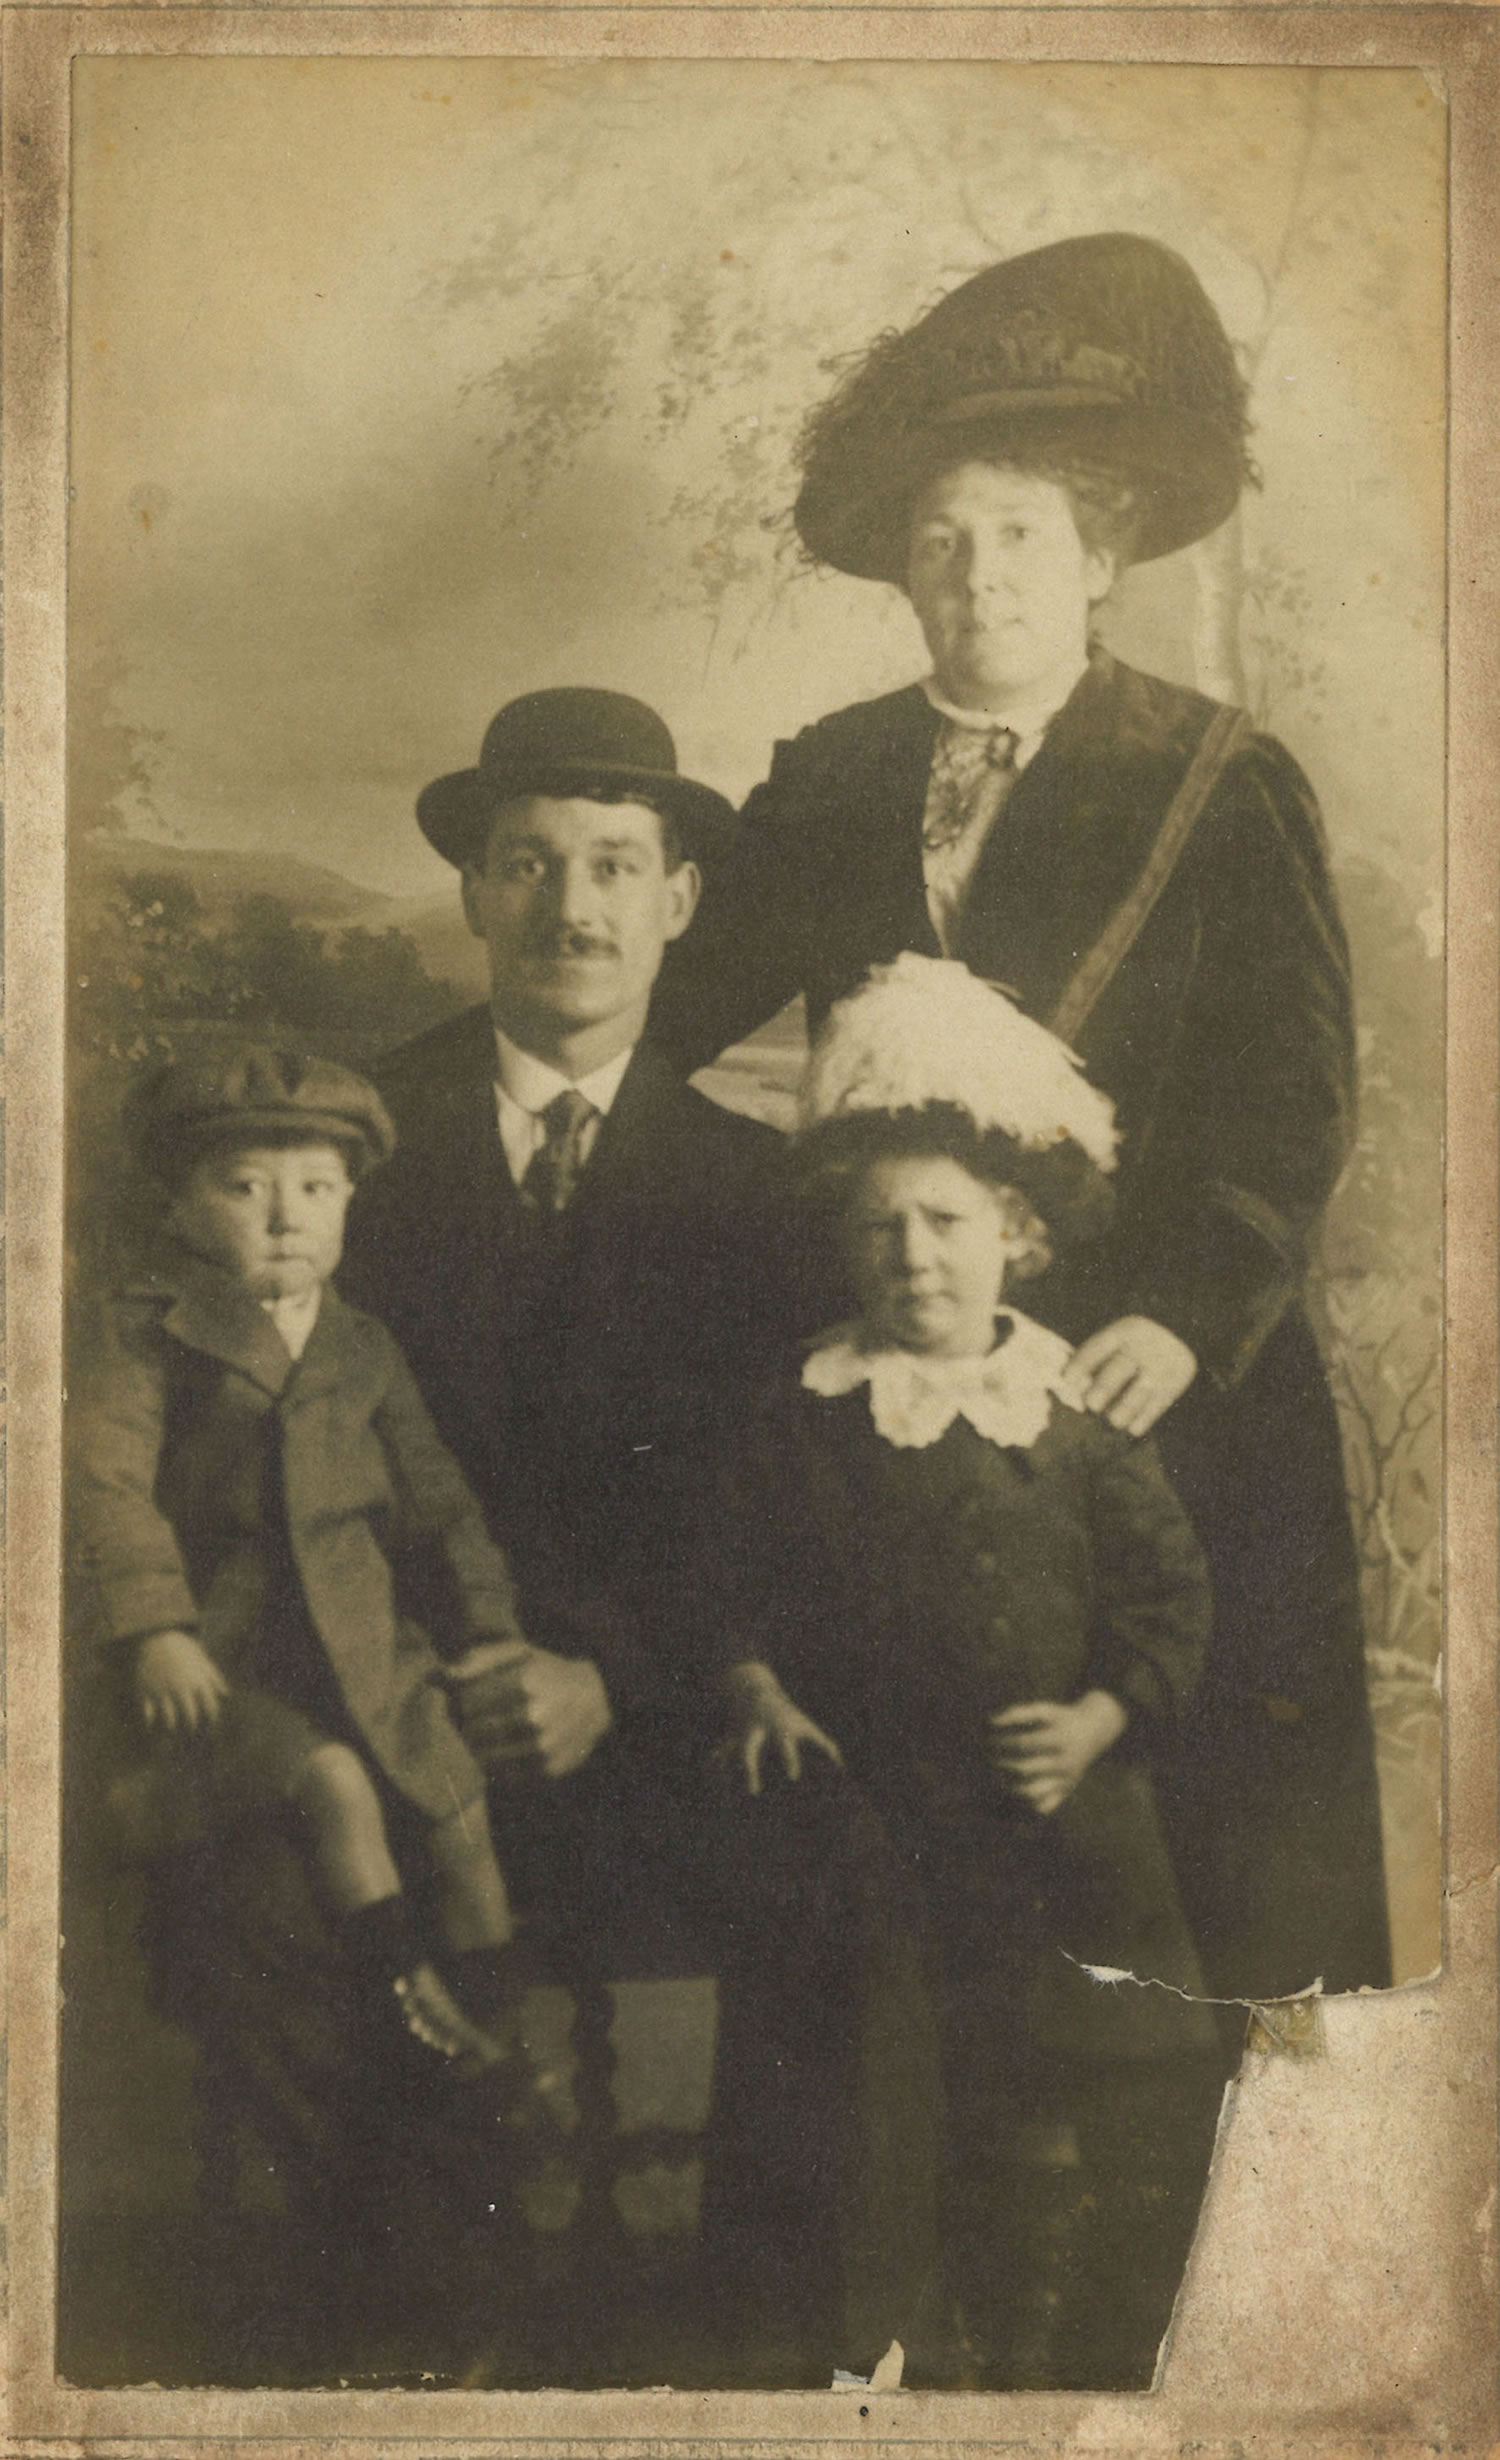 Alfred Walter and Kate Haines (David Walliams' maternal great grandparents) with James (David Walliams' maternal
		great uncle) and Violet (David Walliams' maternal grandmother) as children.